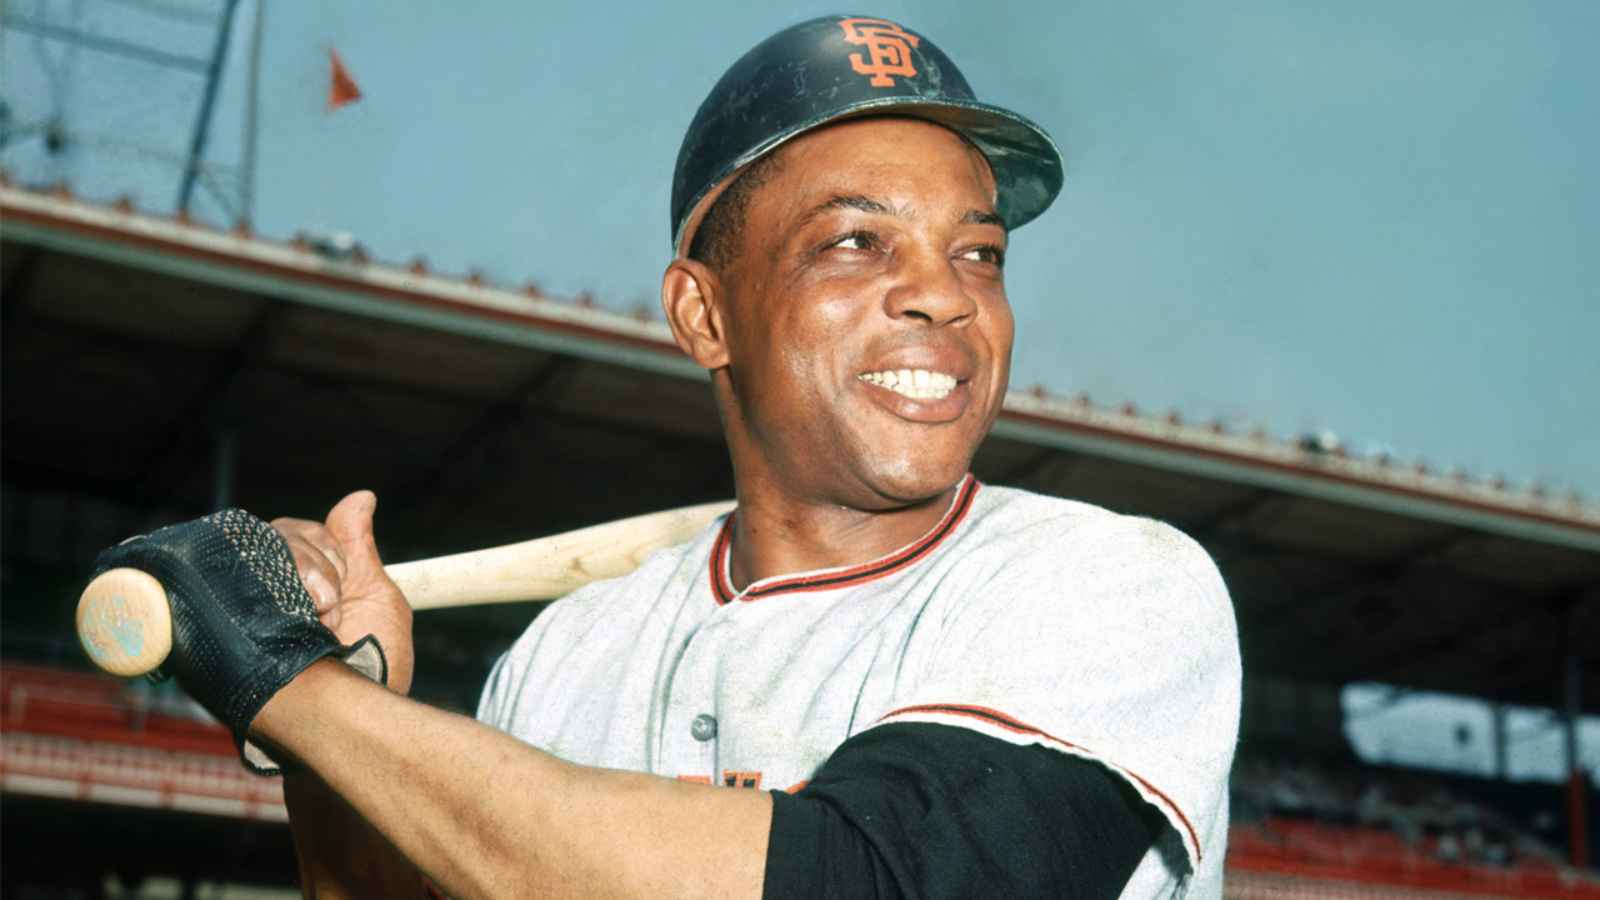 Willie Mays Biography: Age, Height, Birthday, Family, Net Worth